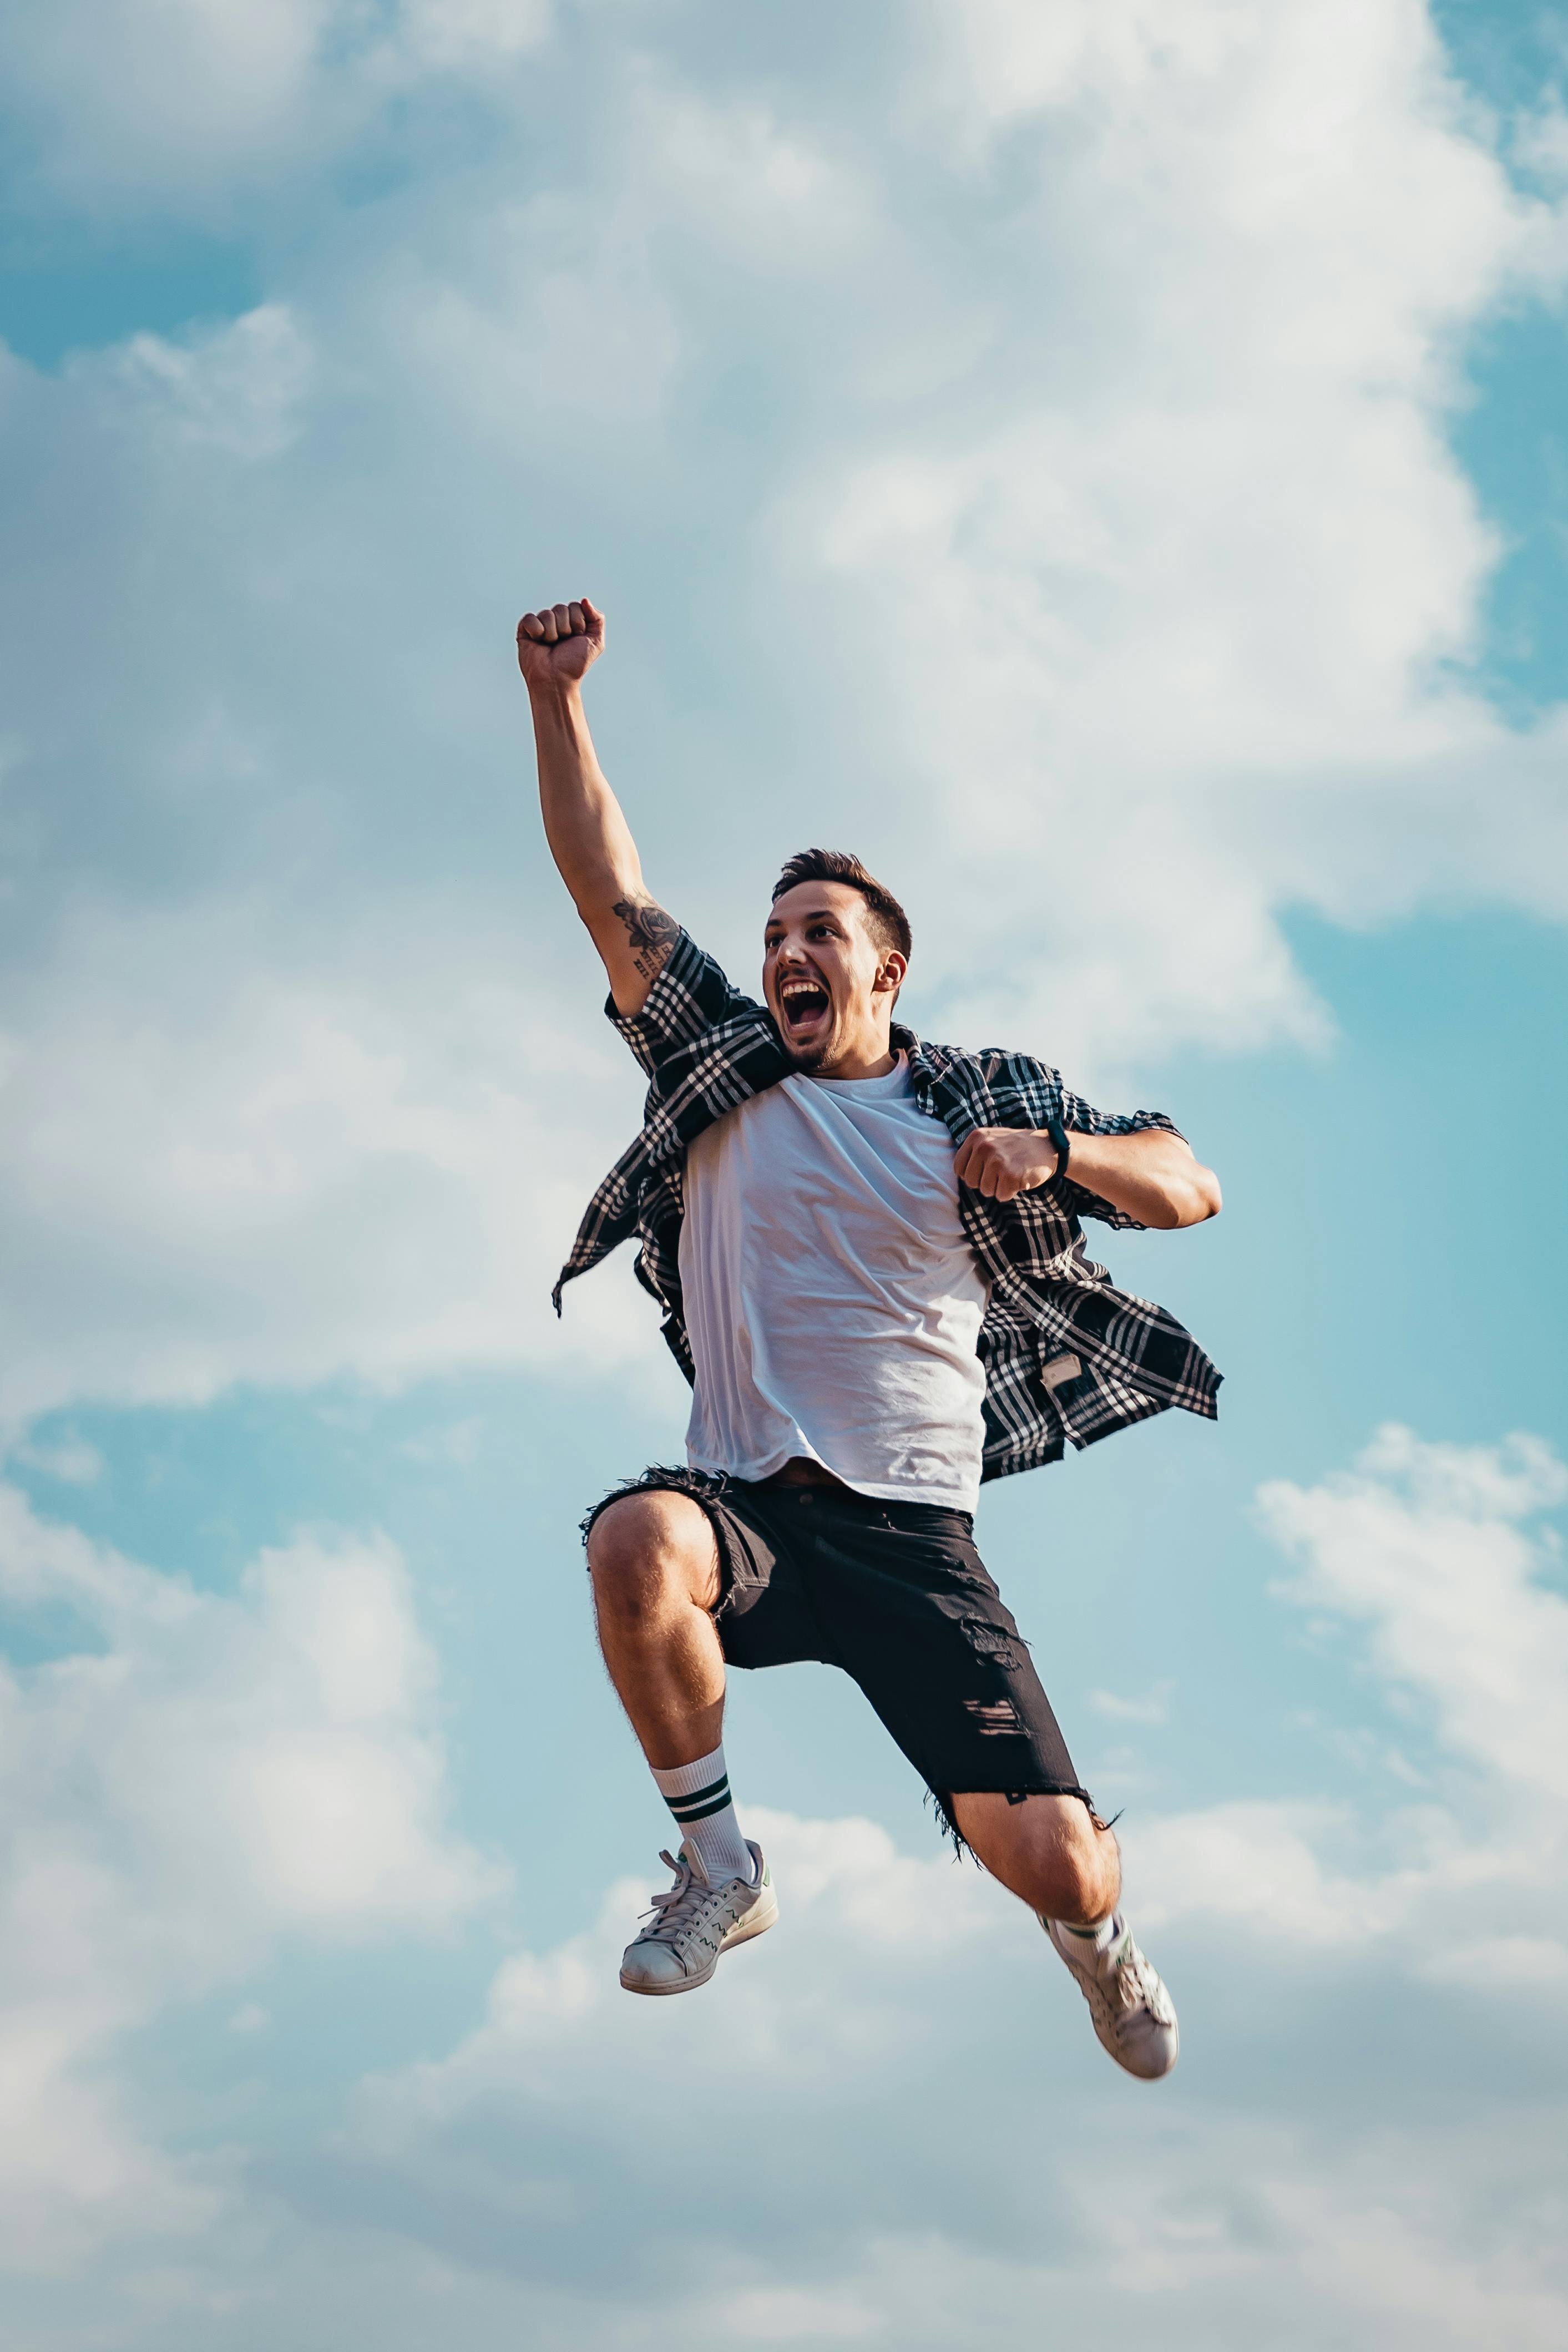 An elated man jumping for joy while celebrating | Source: Pexels